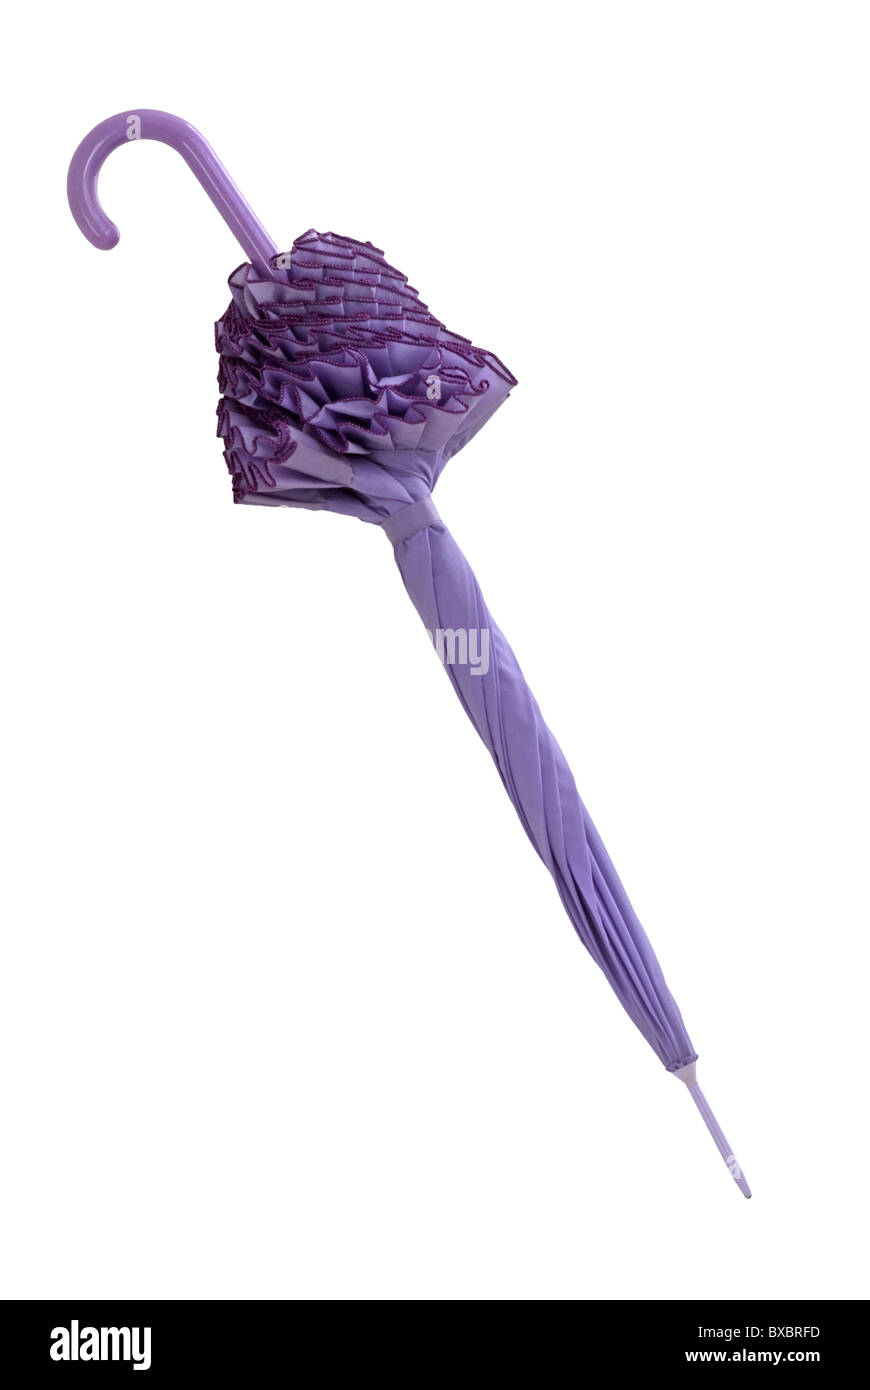 Closed purple fancy parasol or umbrella with ruffles. Isolated or a cutout. Stock Photo